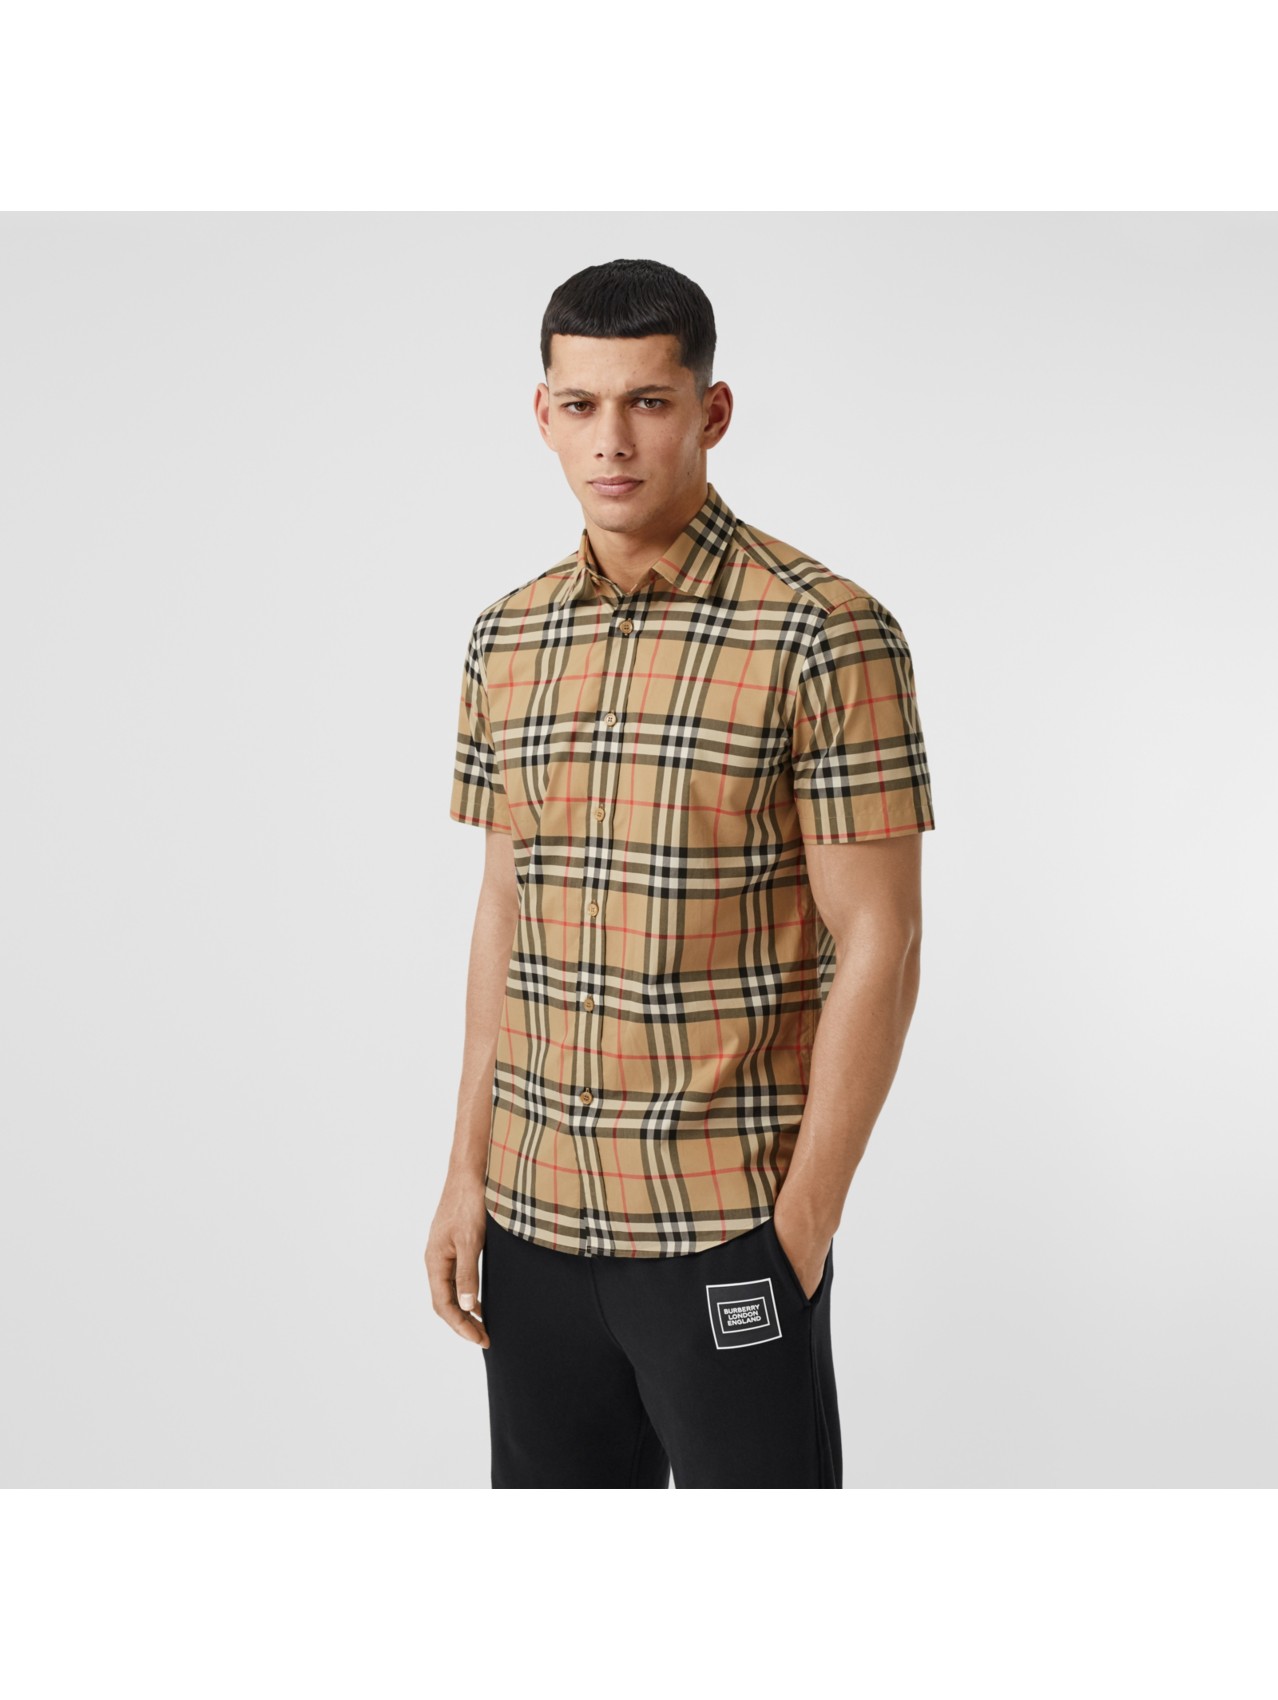 Men’s Casual Shirts | Long Sleeve & Slim Fit | Burberry